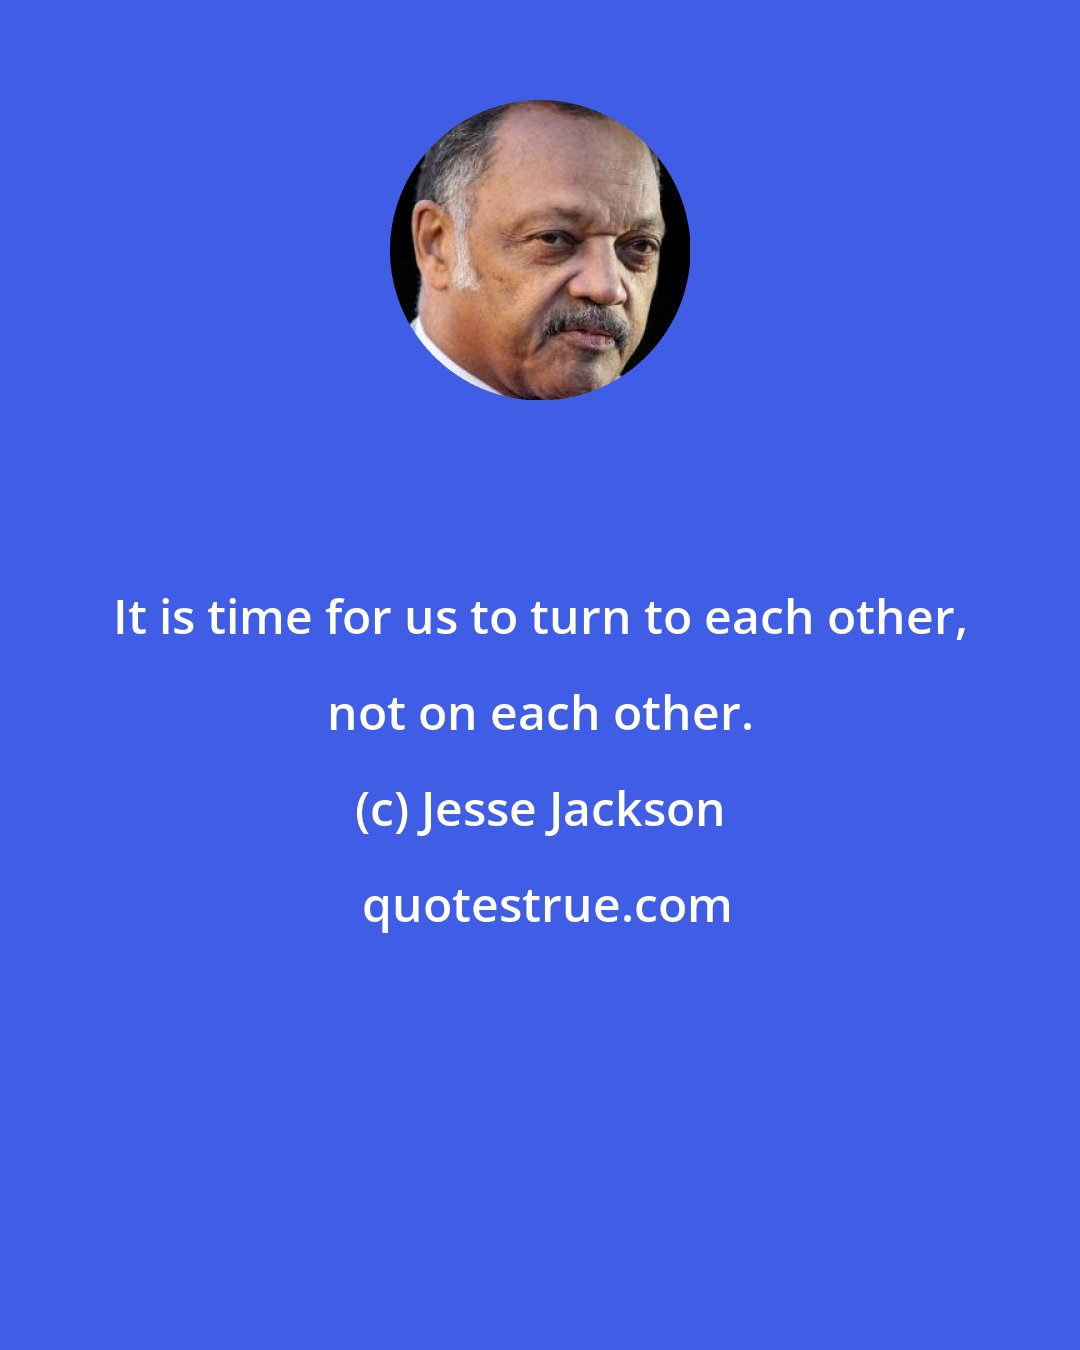 Jesse Jackson: It is time for us to turn to each other, not on each other.